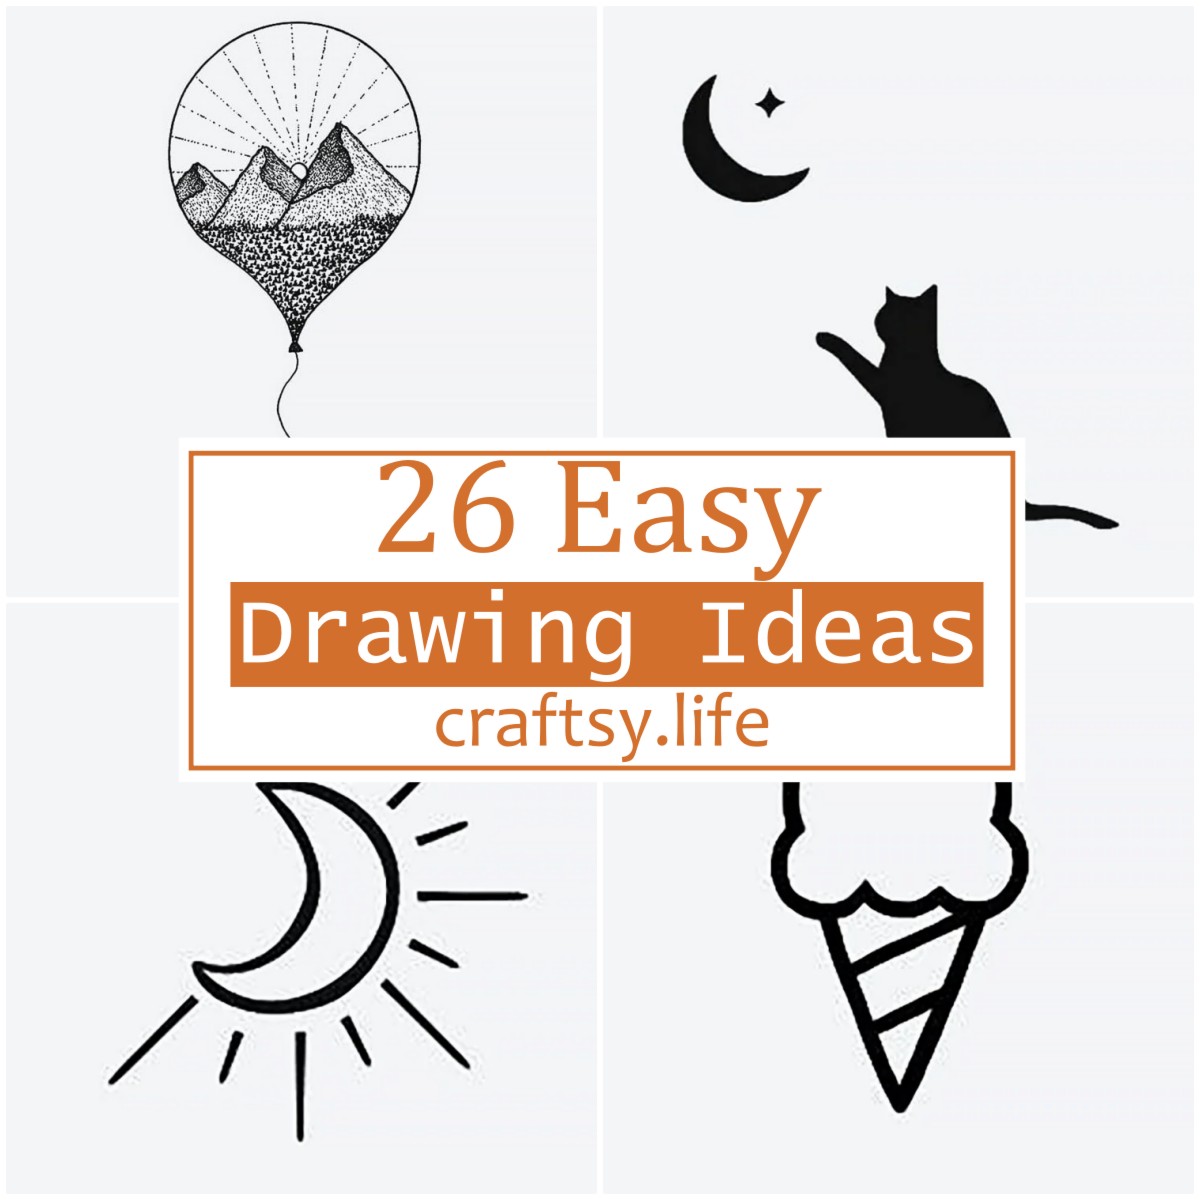 26 Easy Drawing Ideas